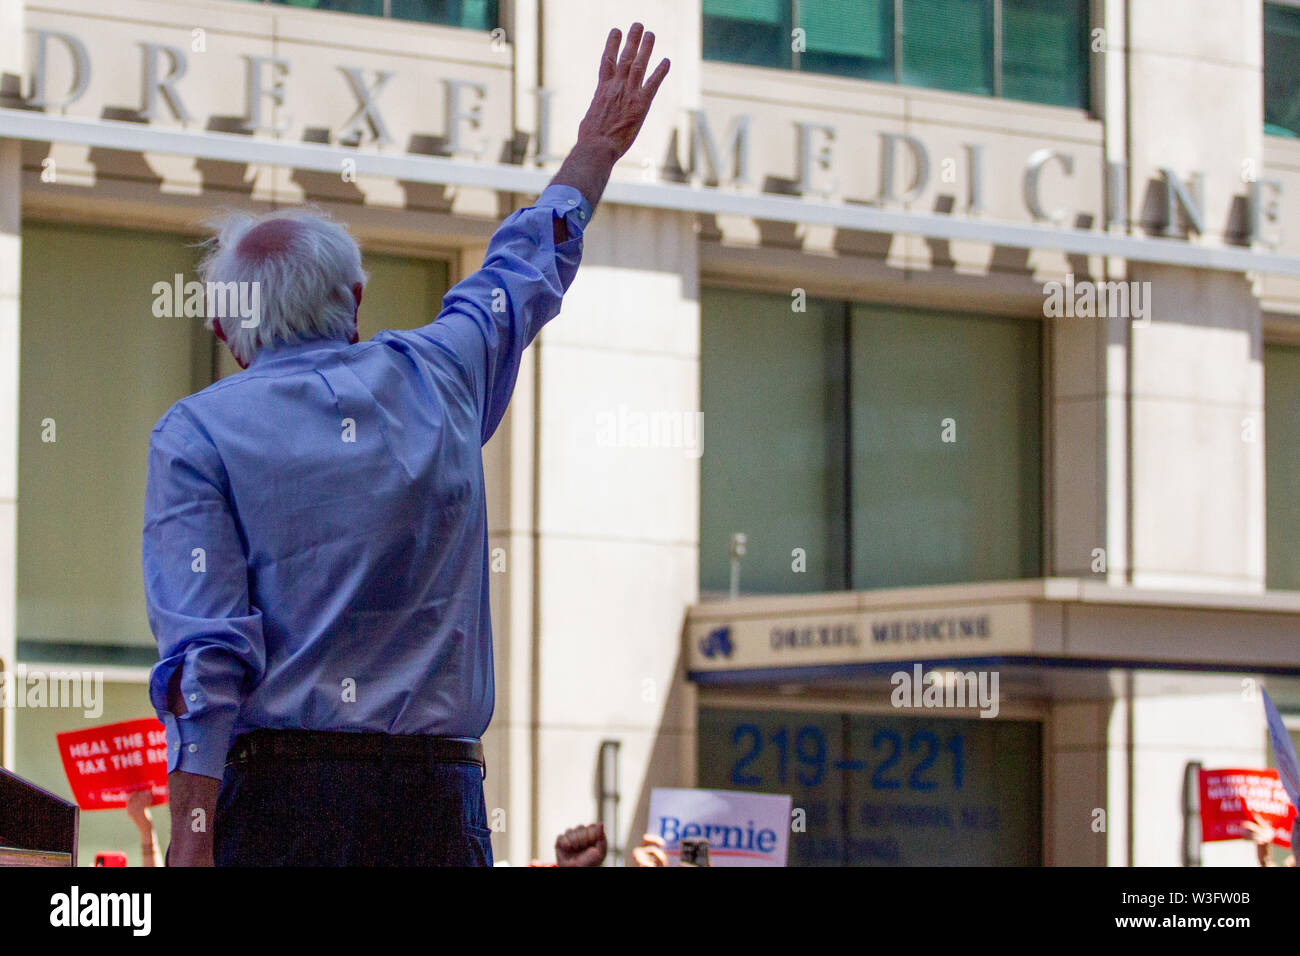 Philadelphia, Pennsylvania, USA. 15th July, 2019. July 15, 2019 - Senator Bernie Sanders arrives at a rally gathered to protest the closure of Hahnemann University Hospital in Philadelphia, PA, July 15, 2019. Hahnemann, a busy urban healthcare center, is facing imminent closure after being acquired by a hedge fund that is looking to raze the building and turn the land into rental or retail properties. (Credit Image: © Michael CandeloriZUMA Wire) Credit: ZUMA Press, Inc./Alamy Live News Stock Photo